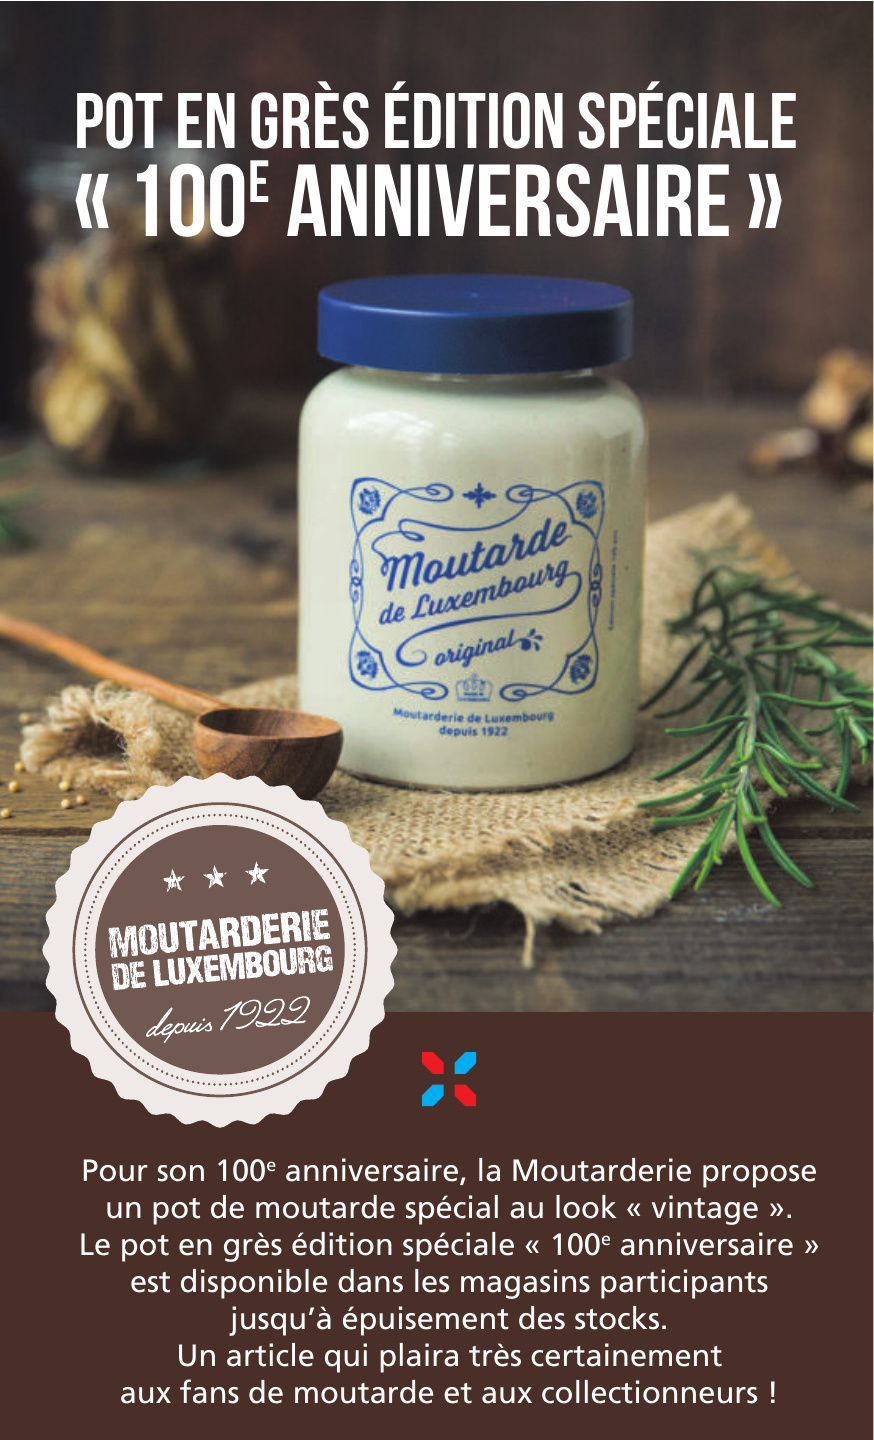 Moutarderie de Luxembourg